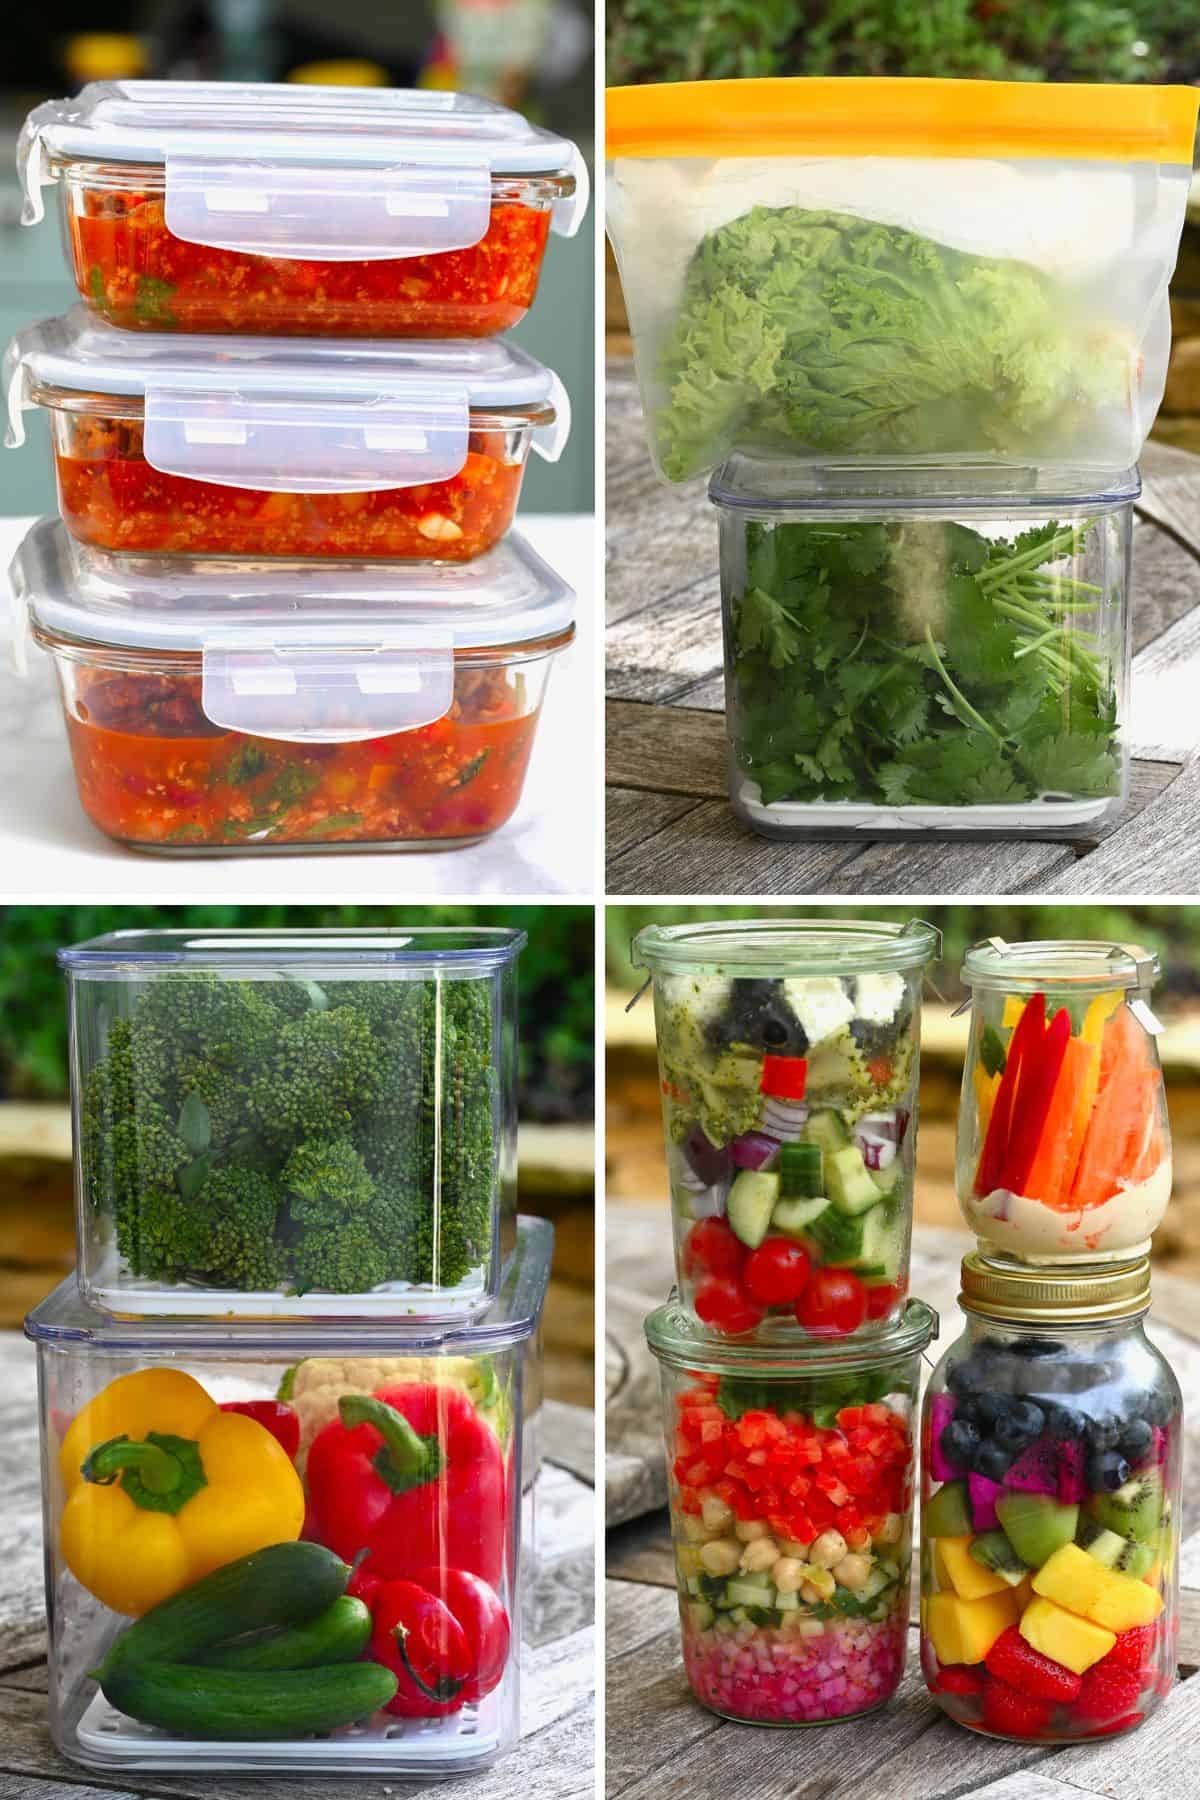 https://www.alphafoodie.com/wp-content/uploads/2022/06/Fridge-Organization-Clear-containers.jpeg